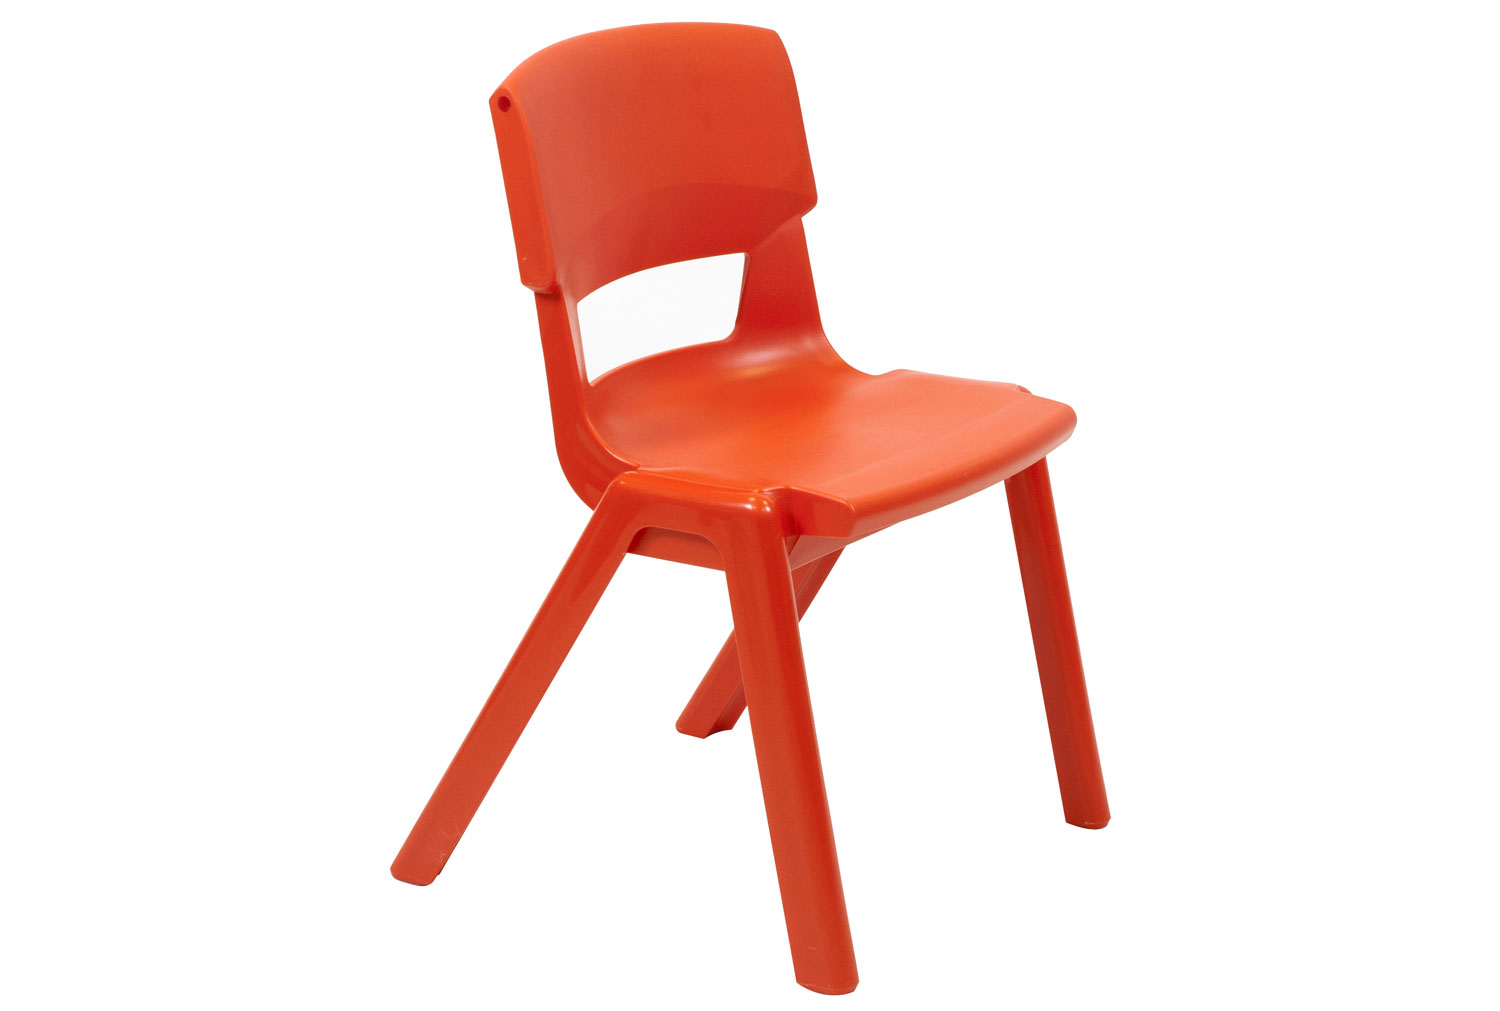 Qty 10 - Postura+ Classroom Chair, 8-11 Years - 34wx31dx38h (cm), Red